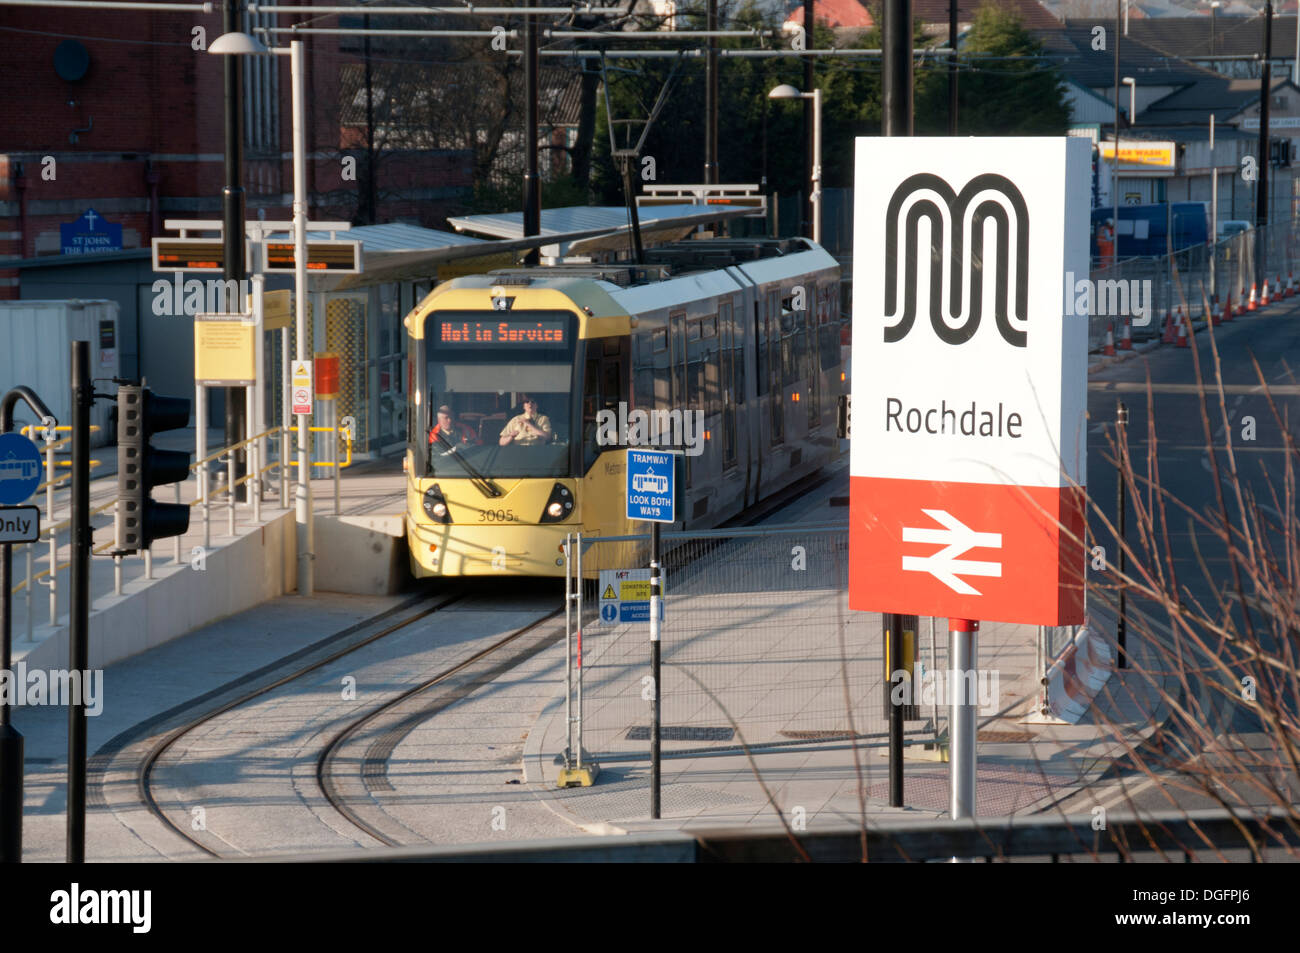 Metrolink tram at the Railway Station stop at Rochdale, Manchester, England, UK. Rail station sign in foreground. Stock Photo